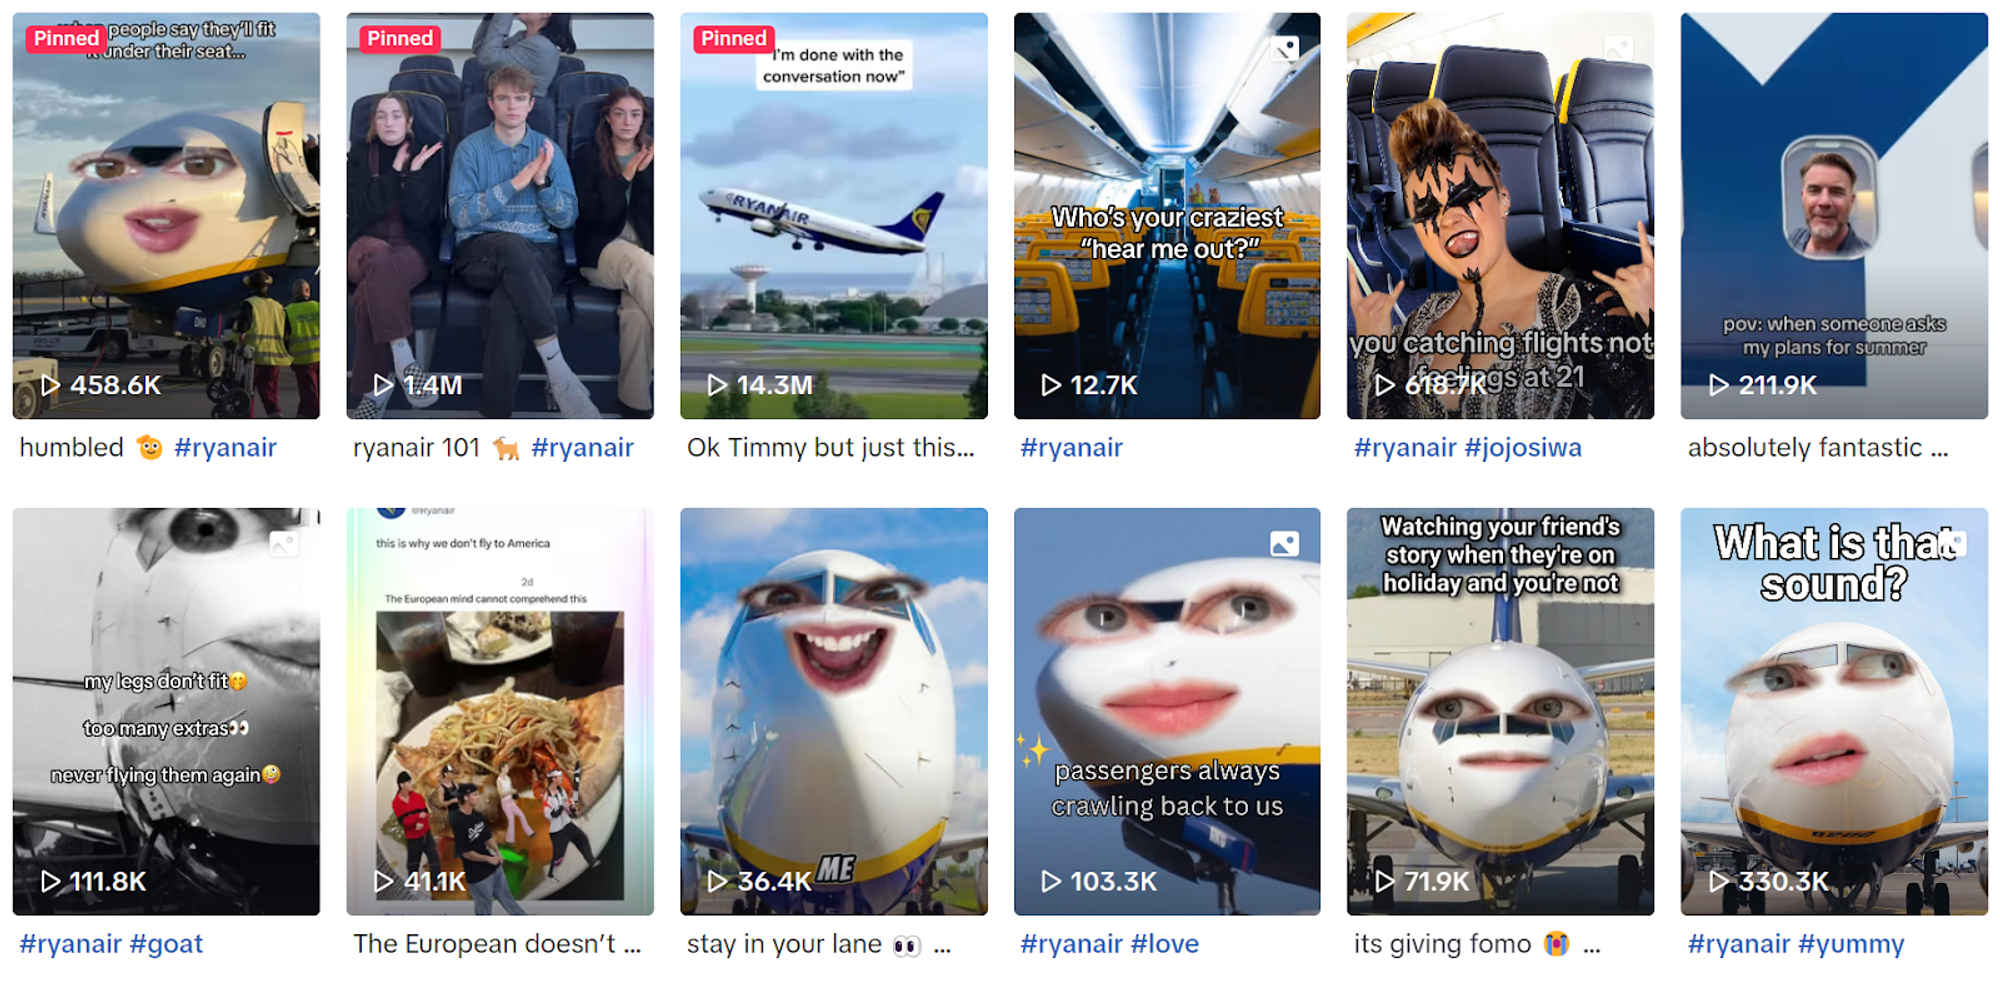 Ryanair’s TikTok page featuring it’s unofficial mascot